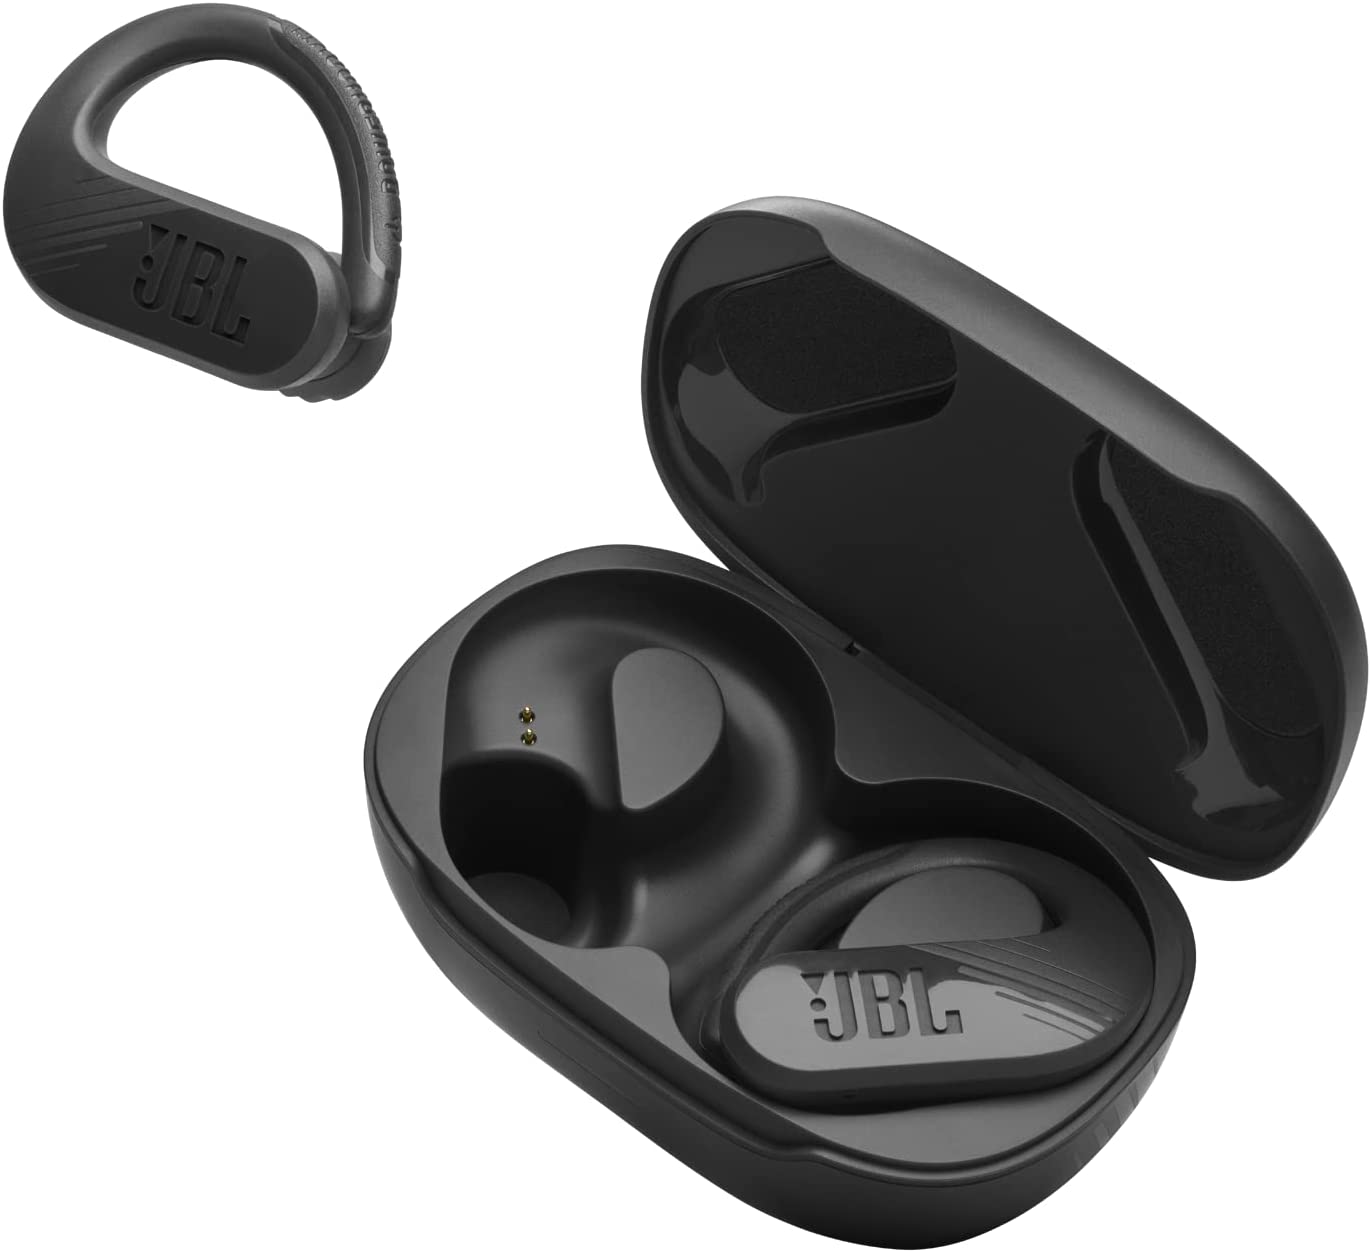 Connecting JBL Wireless Earbuds To Your Phone